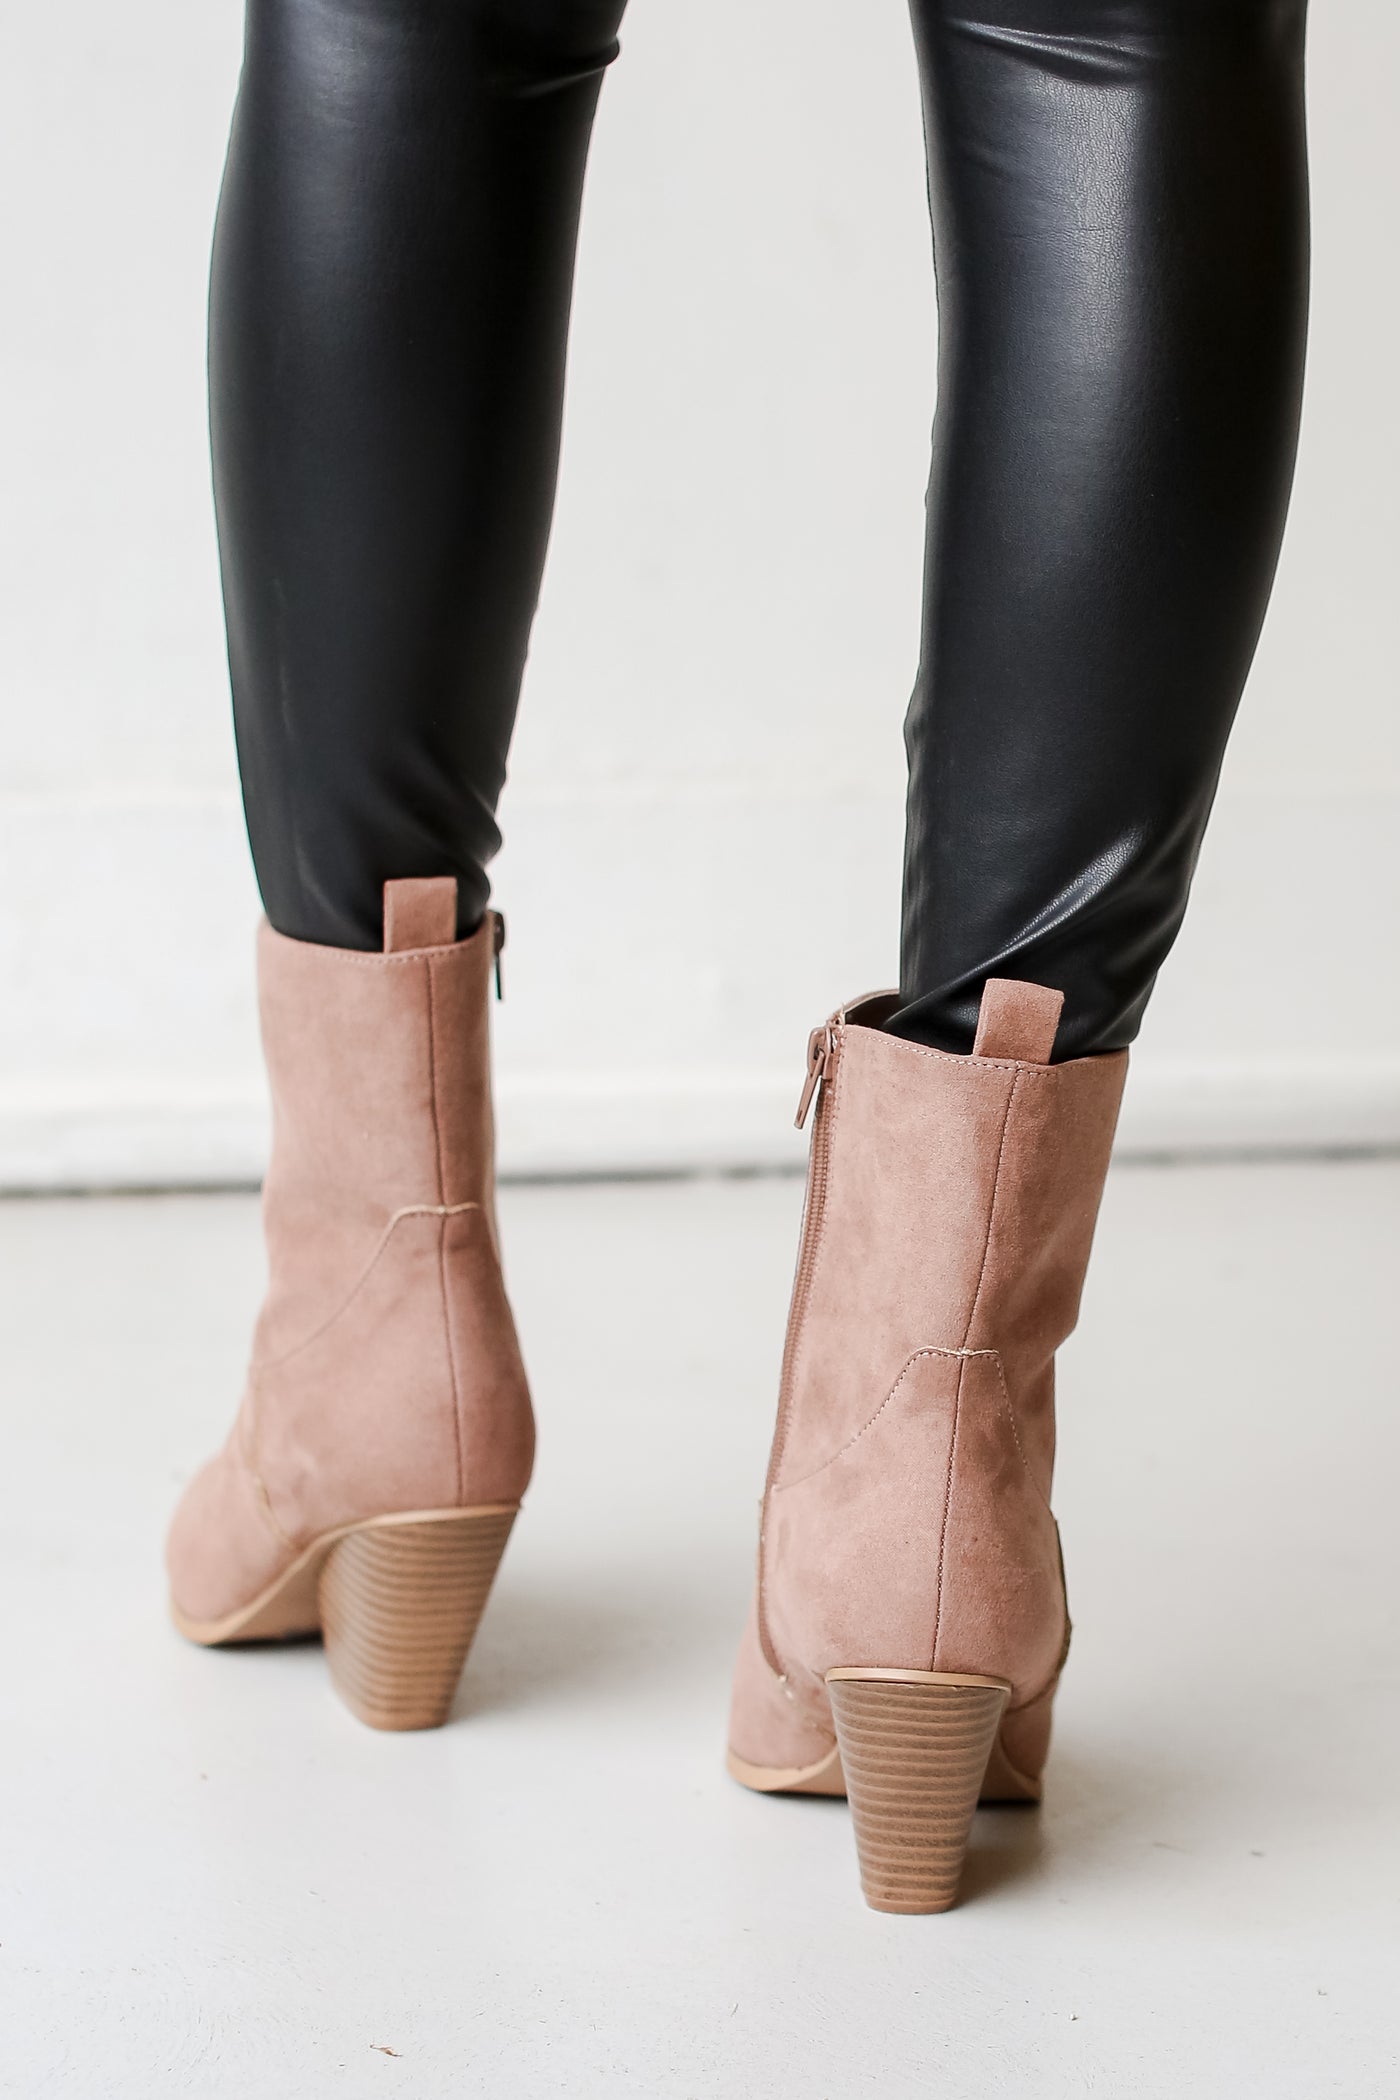 Brown Western Booties for fall